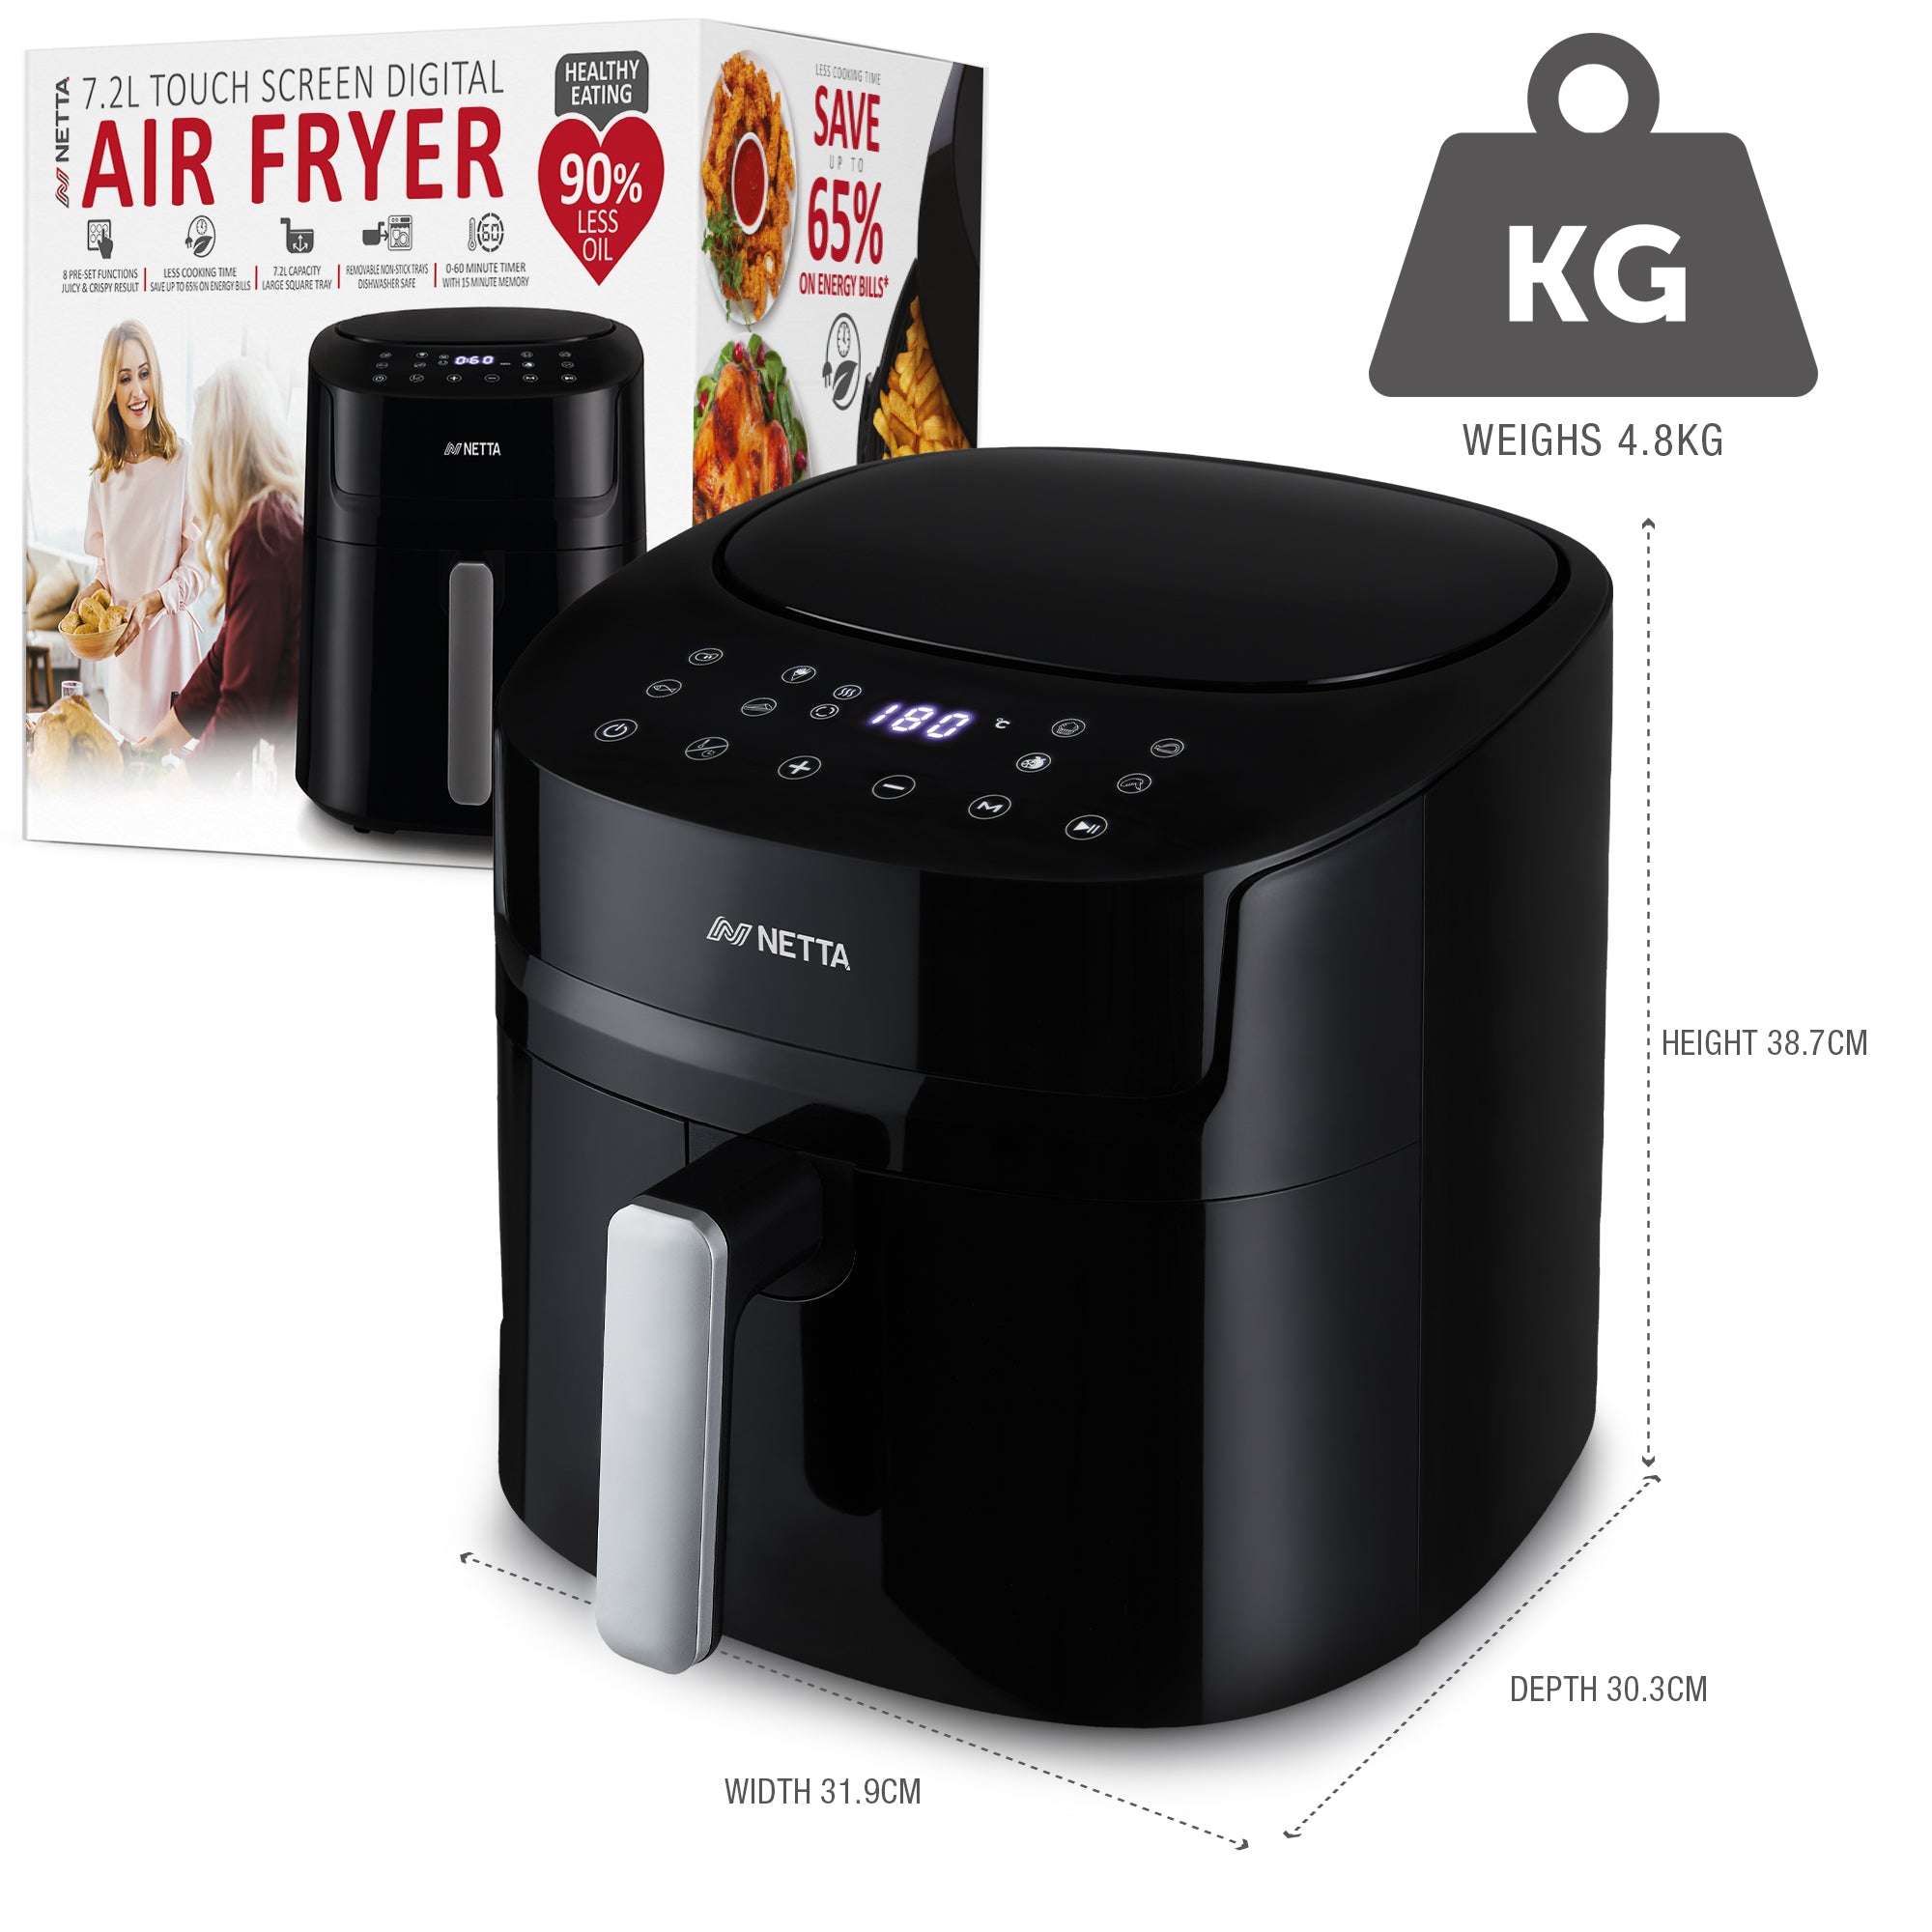 NETTA Digital Air Fryer with Drawer and Detachable Non-Stick Frying Tray